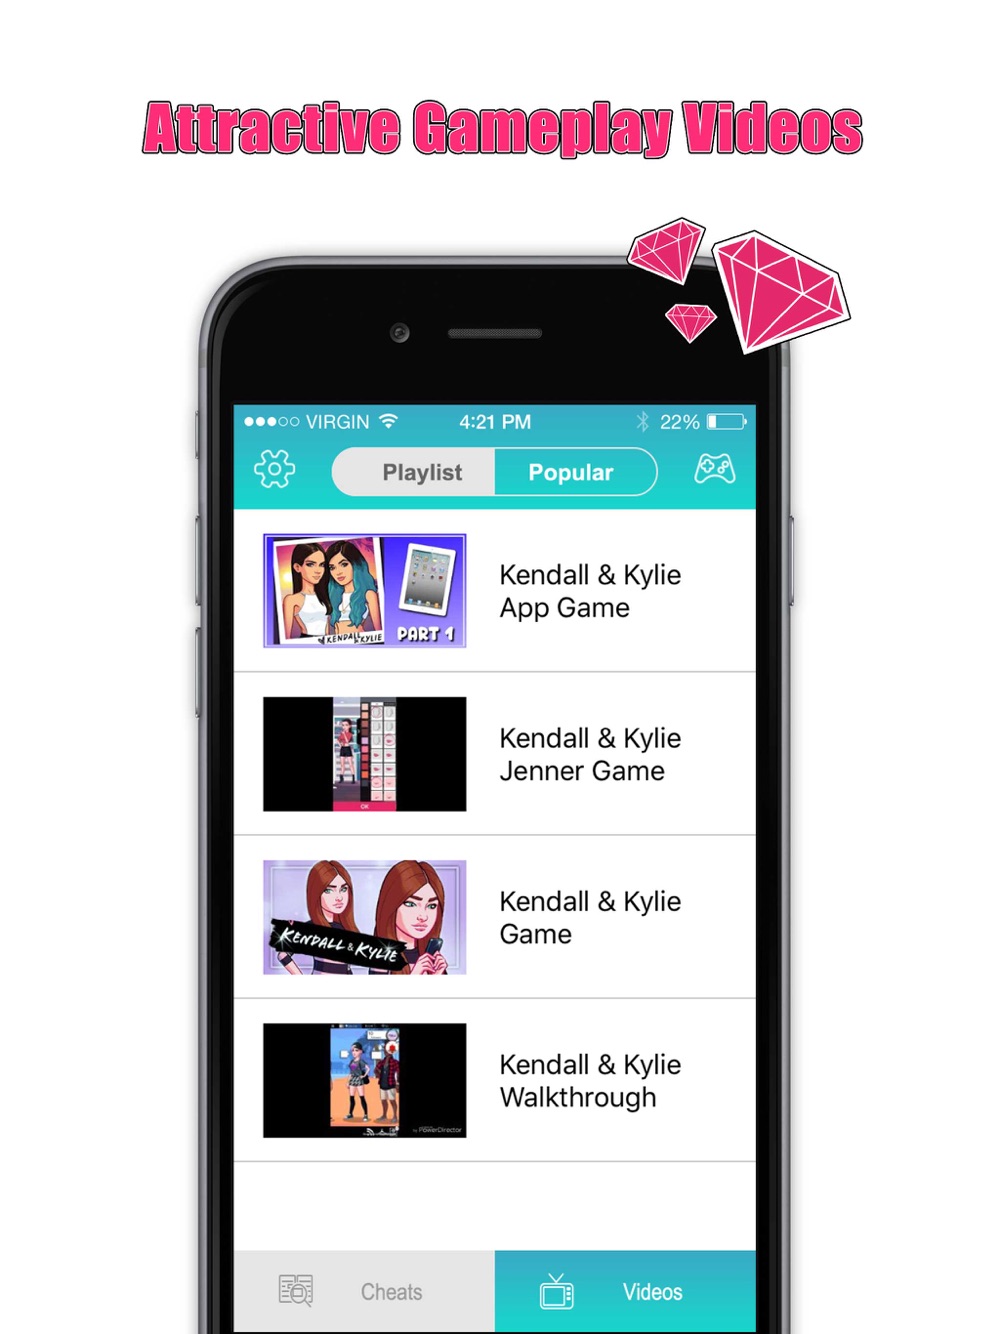 Walkthrough kylie game Kendall and